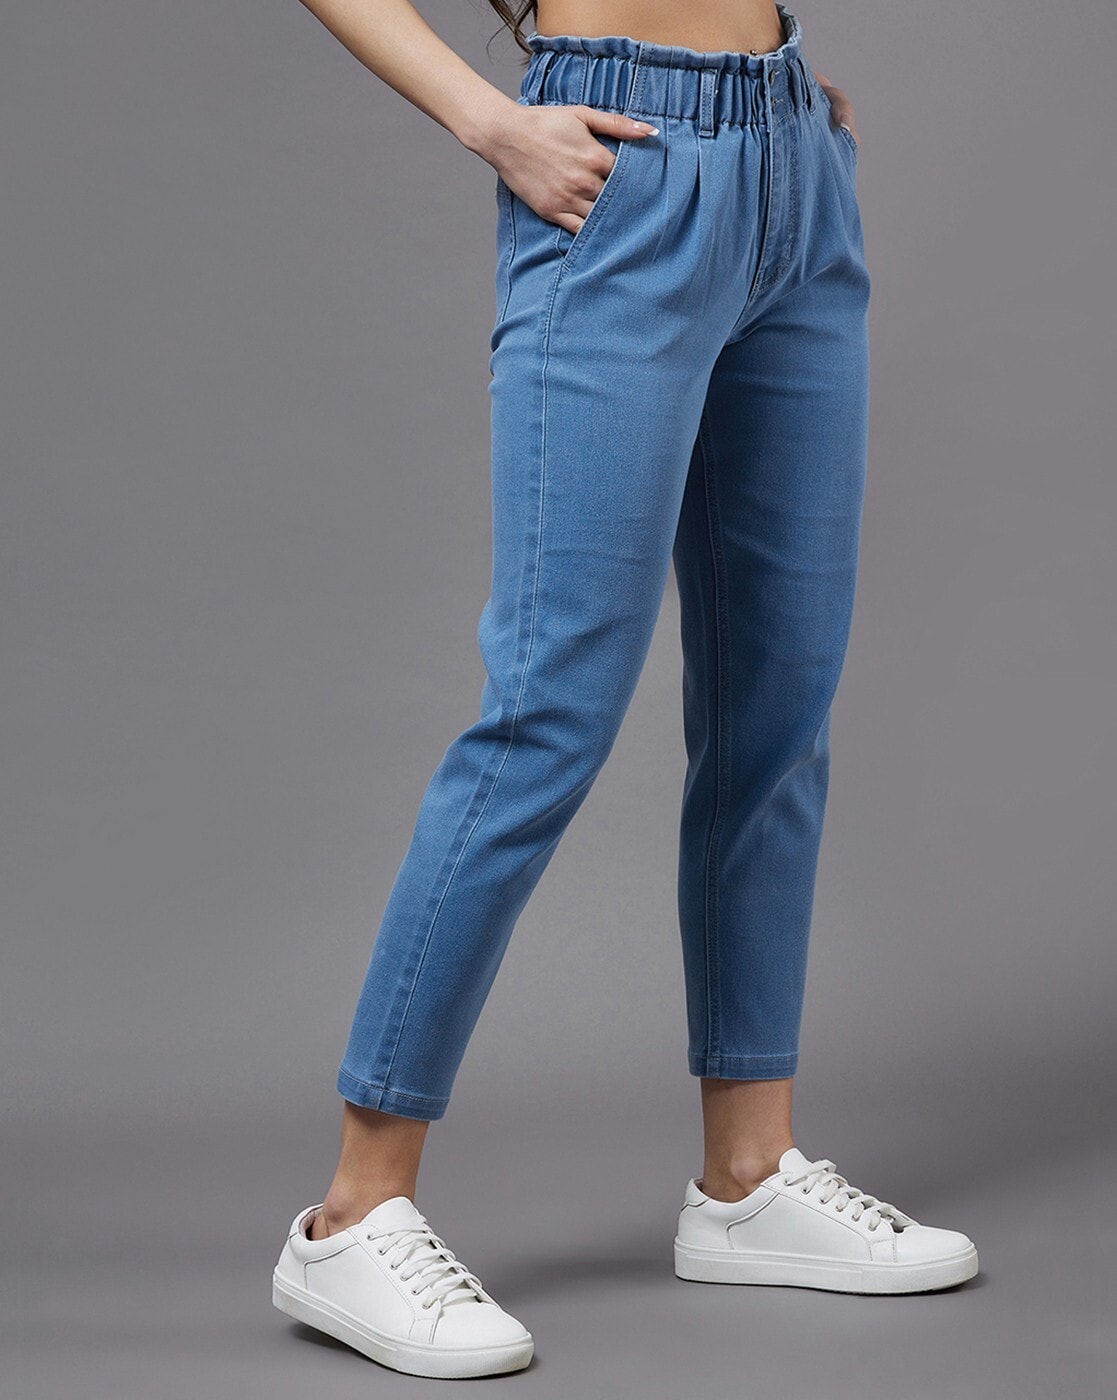 Trouser Jeans - Chico's